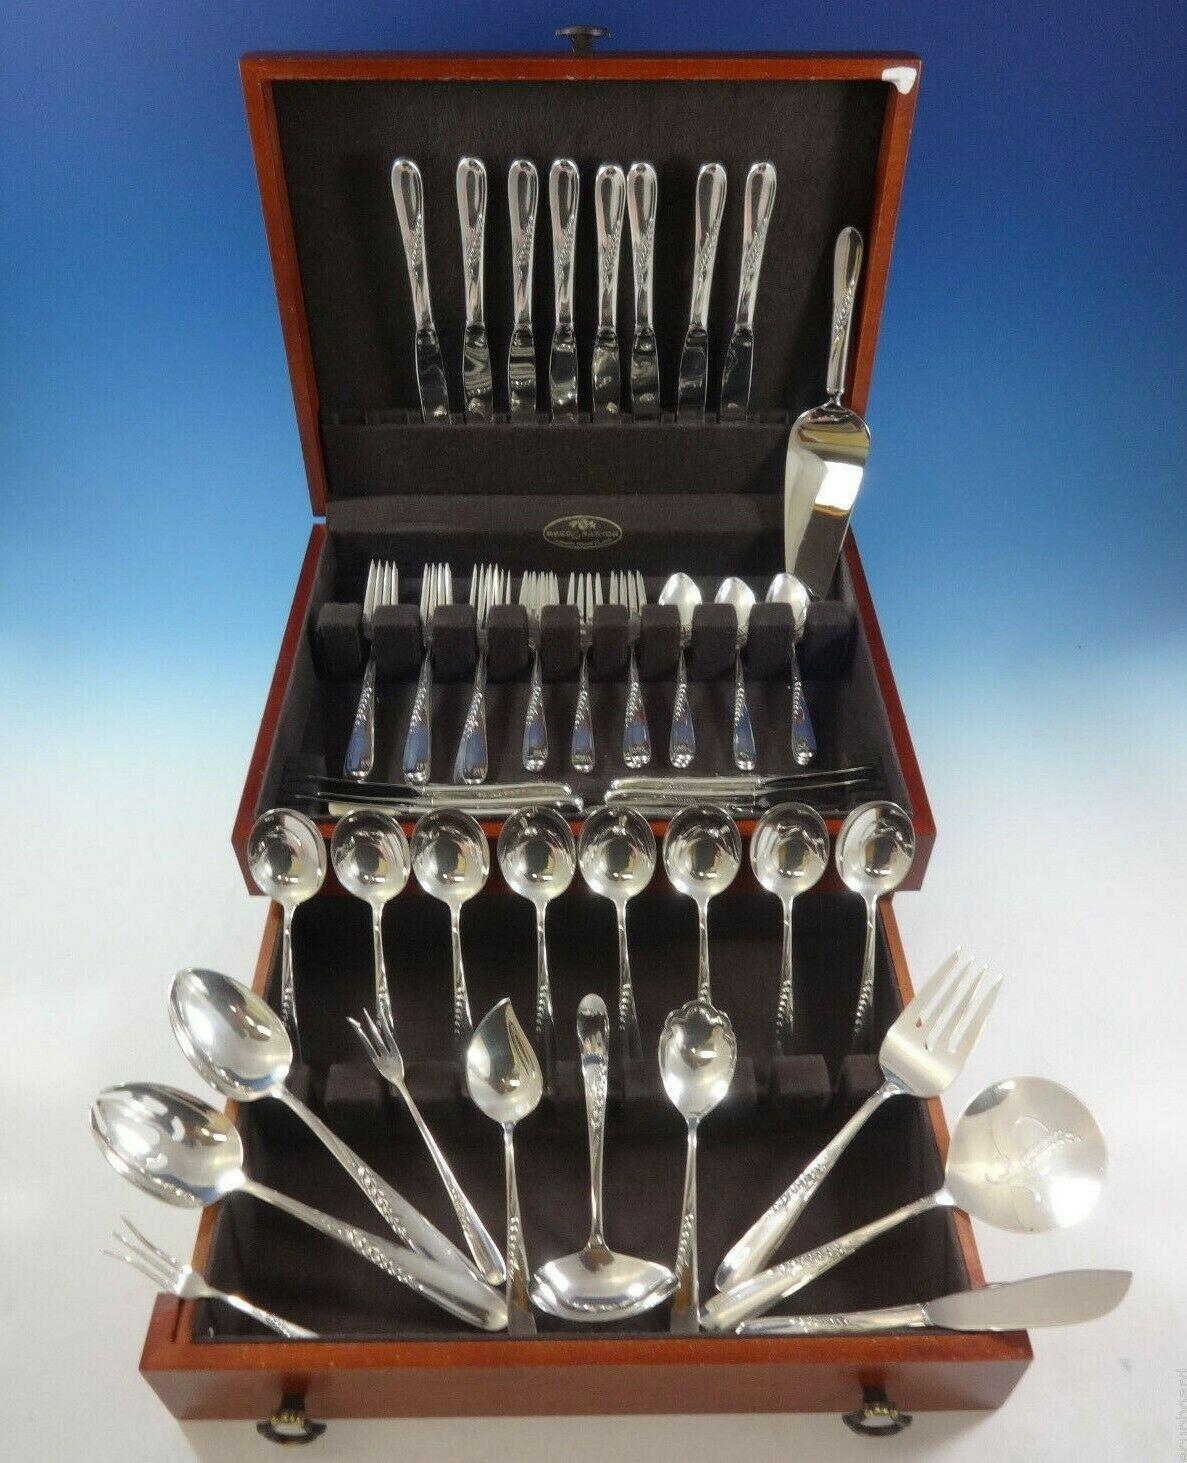 Silver wheat by Reed & Barton sterling silver flatware set, 59 pieces. This set includes:

8 knives, 8 3/4